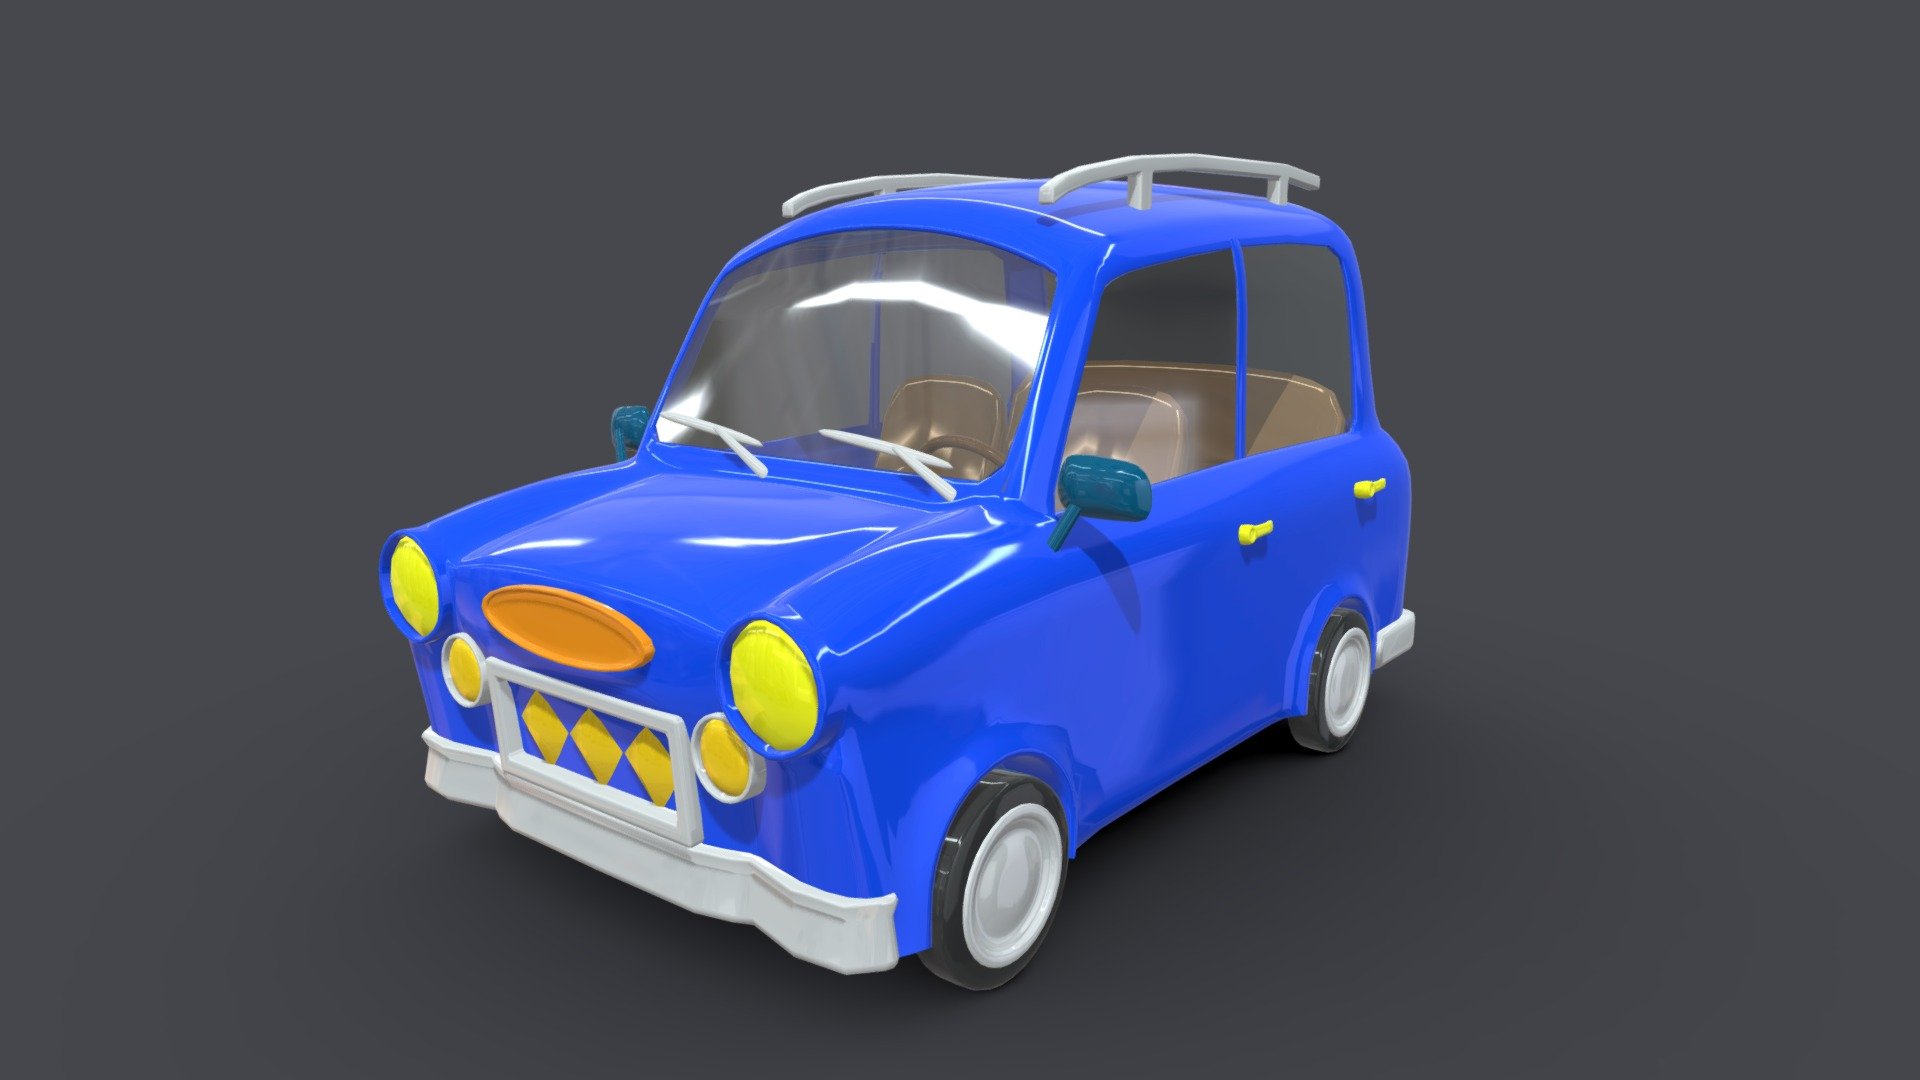 3D Models Car

Polys : 19132 Verts: 20043

Textures: 01 textures diff 2048 x 2048 pixel

Model we designed to be suitable for cartoons.

Hope you like this

Thanks for watching - Asset - Cartoons - Car - 02 - 3D Model - Buy Royalty Free 3D model by InCom Studio (@incomstudio) 3d model